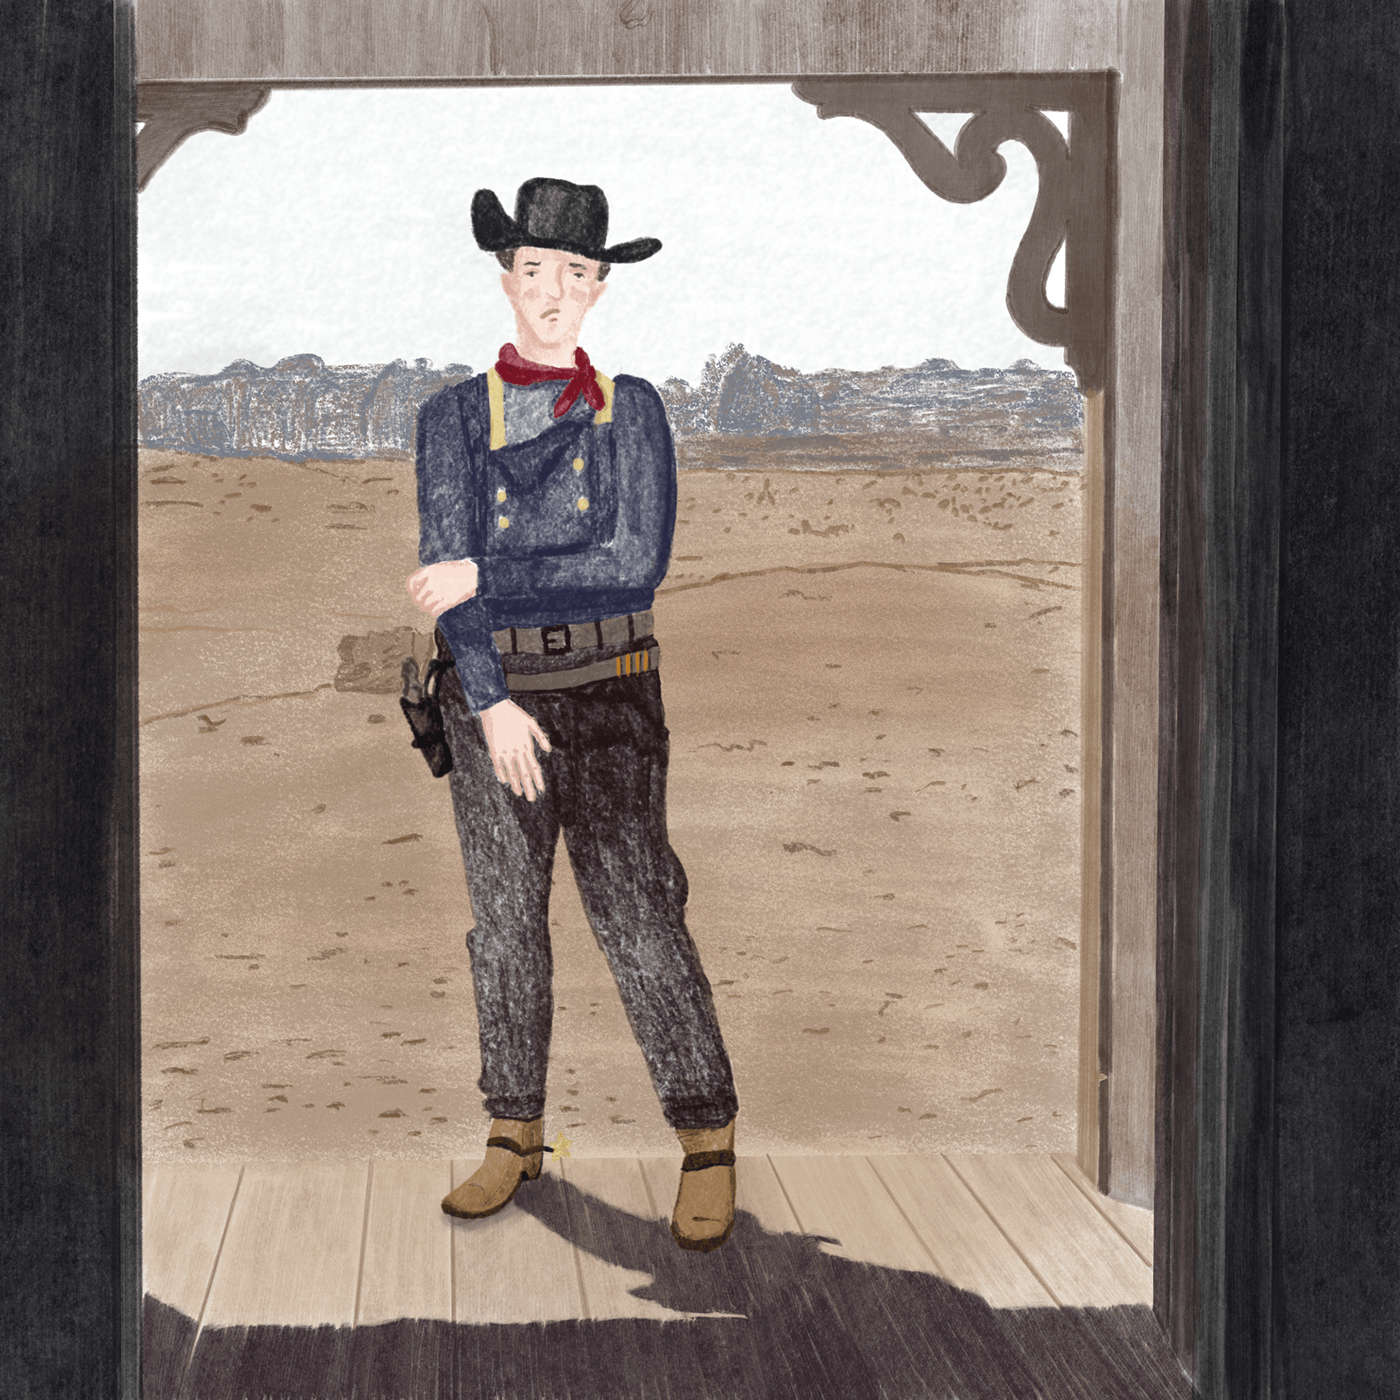 digital painting DigitalIllustration Drawing  Editorial Illustration ILLUSTRATION  John Wayne movie poster Procreate the searchers westernclassic